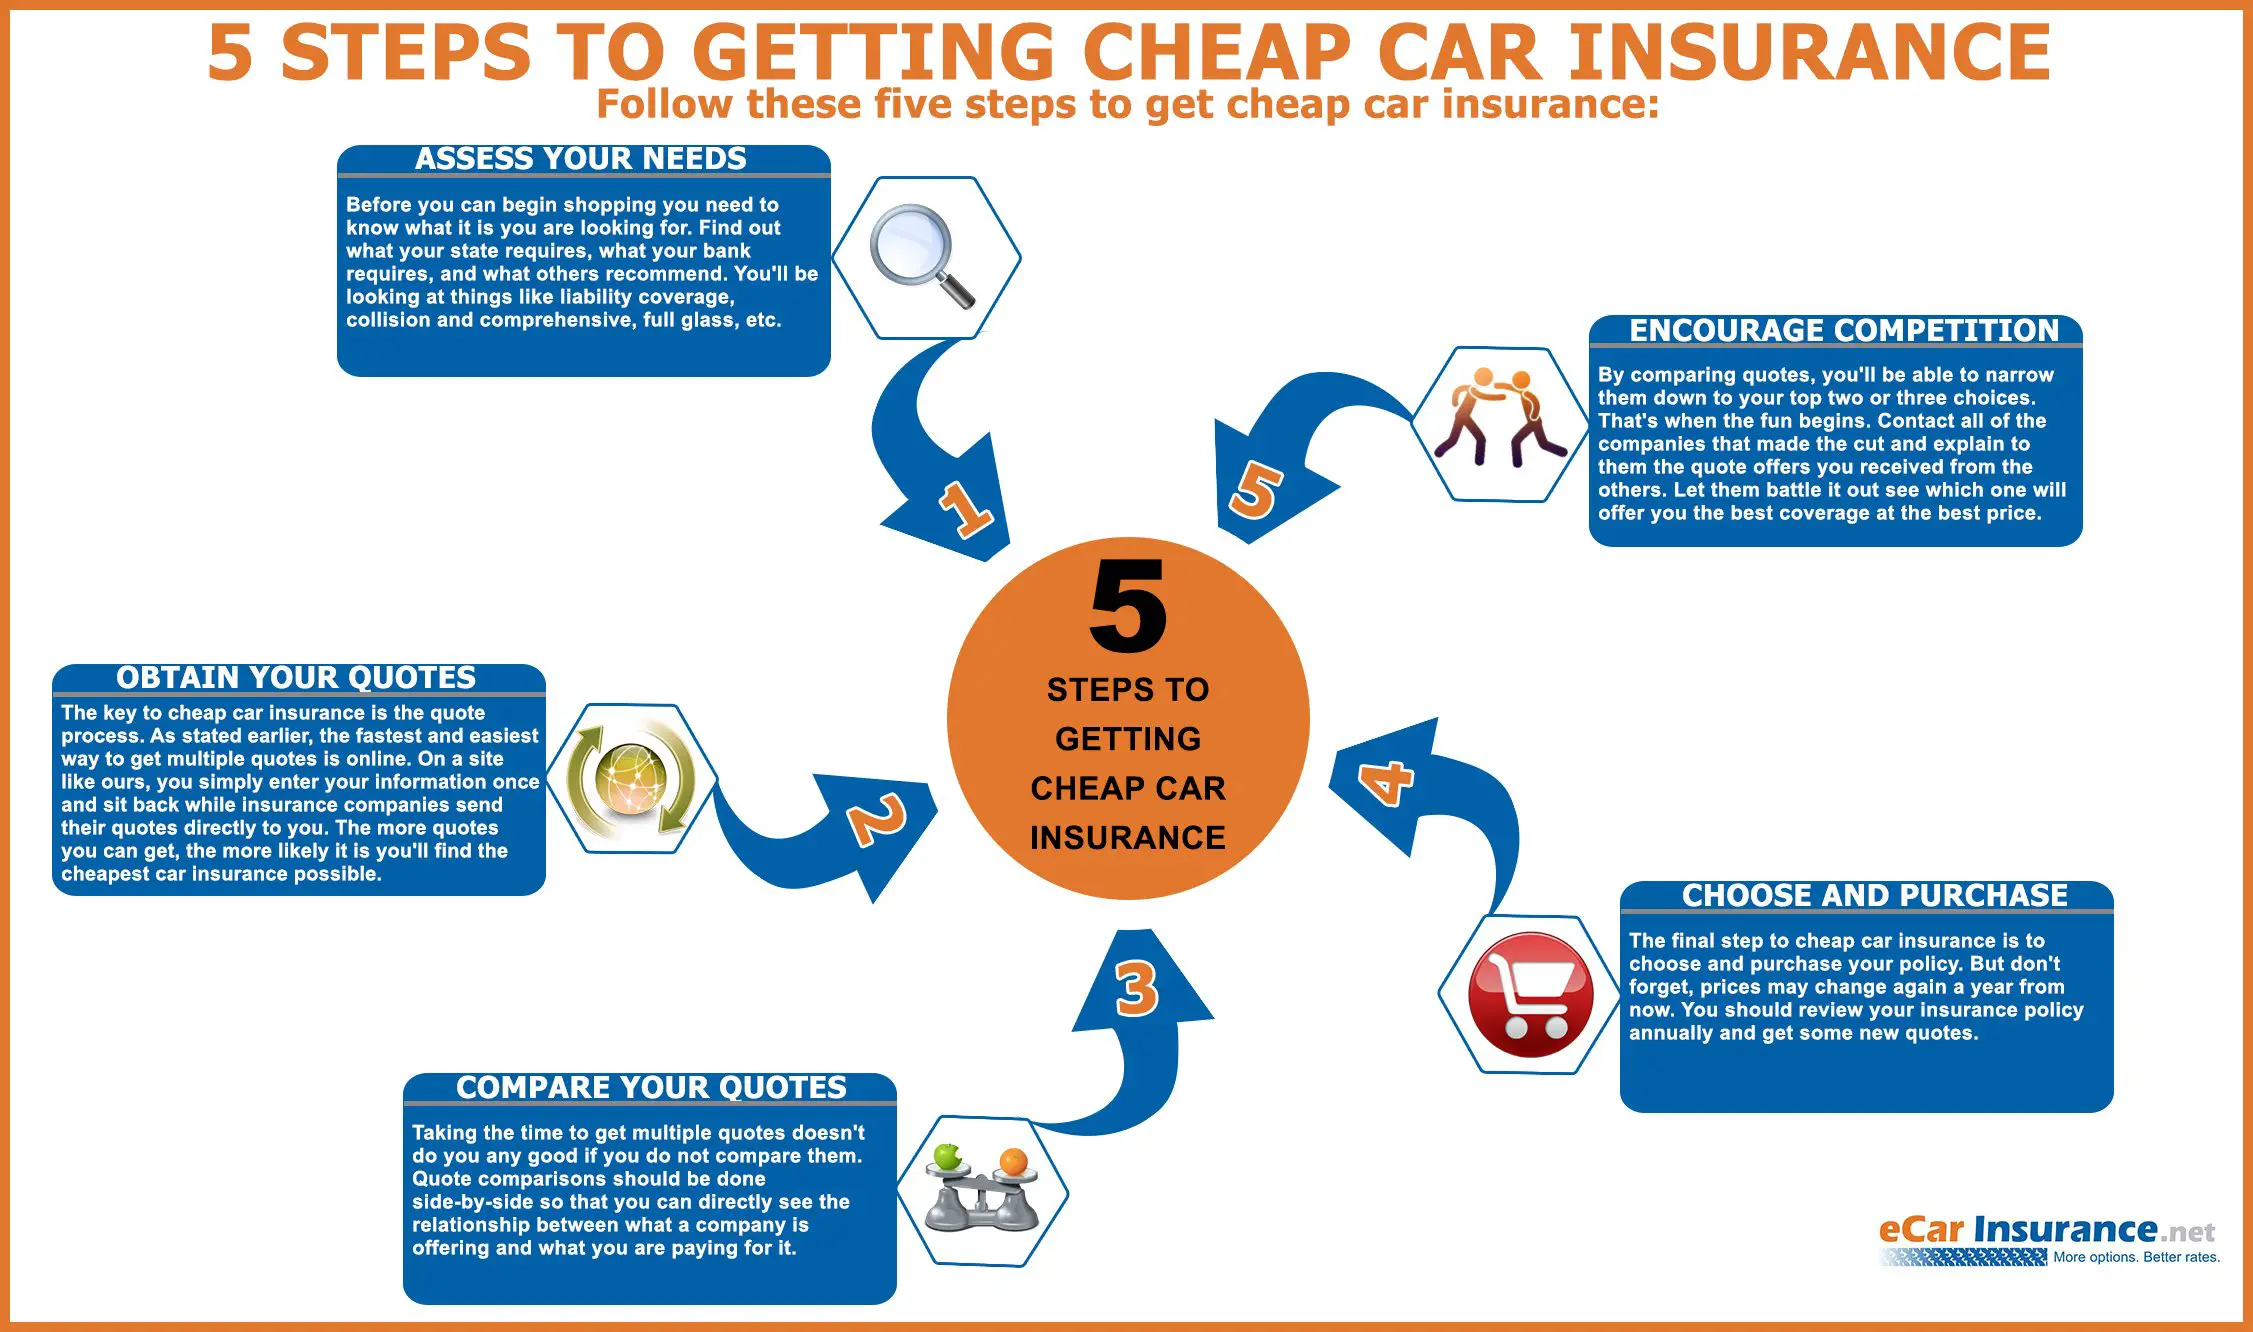 5 Steps: How To Get Cheap Car Insurance [Infographic]